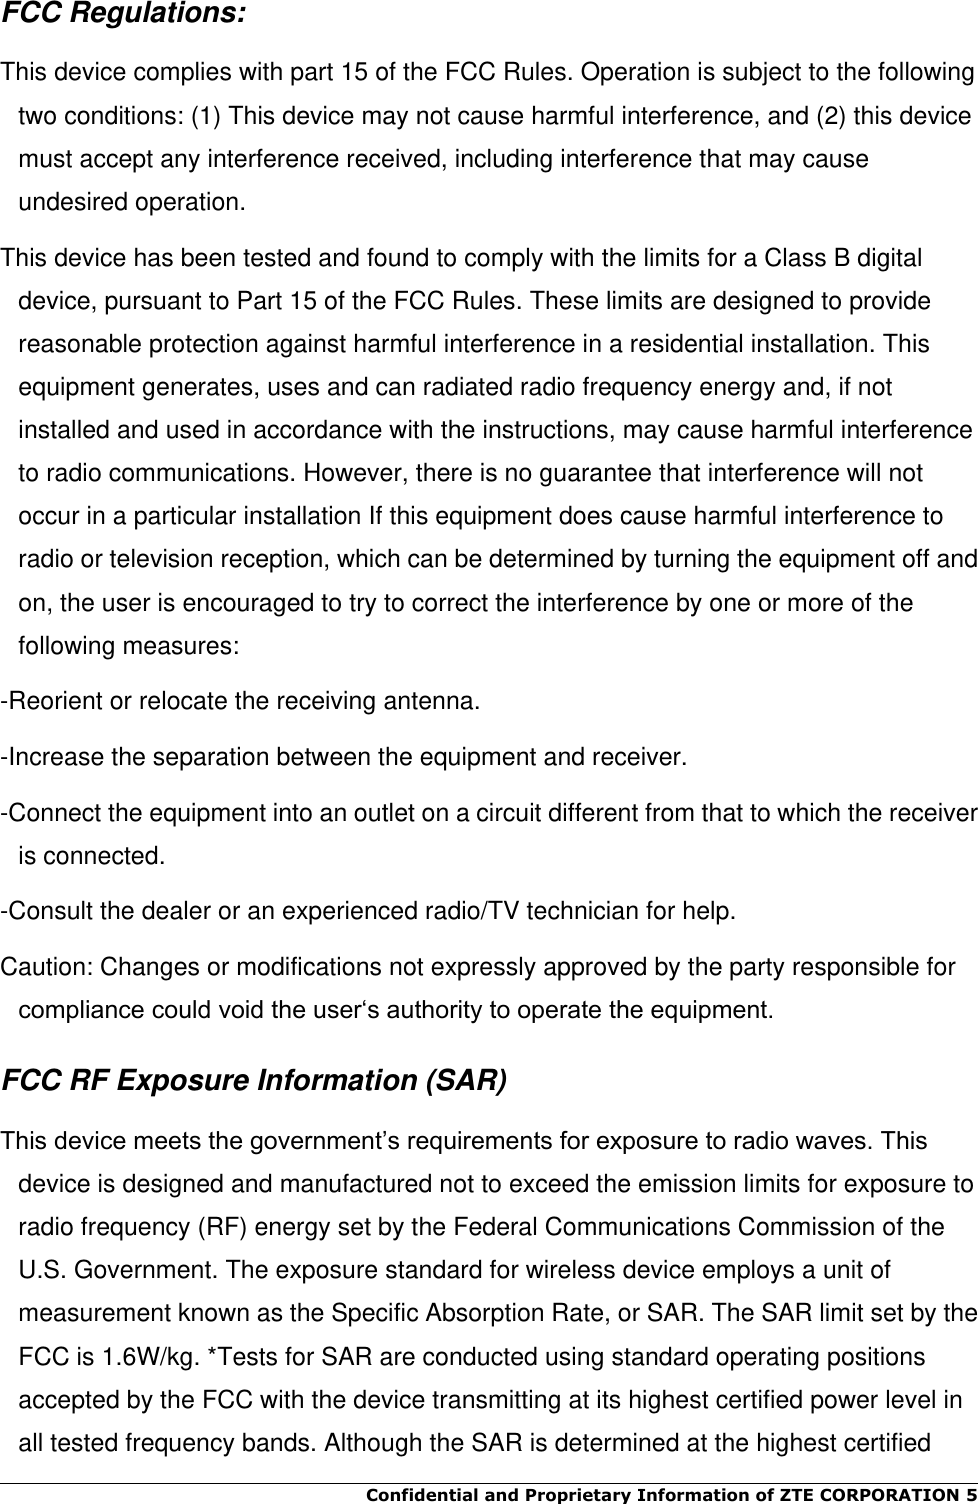 Confidential and Proprietary Information of ZTE CORPORATION 5    FCC Regulations: This device complies with part 15 of the FCC Rules. Operation is subject to the following two conditions: (1) This device may not cause harmful interference, and (2) this device must accept any interference received, including interference that may cause undesired operation. This device has been tested and found to comply with the limits for a Class B digital device, pursuant to Part 15 of the FCC Rules. These limits are designed to provide reasonable protection against harmful interference in a residential installation. This equipment generates, uses and can radiated radio frequency energy and, if not installed and used in accordance with the instructions, may cause harmful interference to radio communications. However, there is no guarantee that interference will not occur in a particular installation If this equipment does cause harmful interference to radio or television reception, which can be determined by turning the equipment off and on, the user is encouraged to try to correct the interference by one or more of the following measures: -Reorient or relocate the receiving antenna. -Increase the separation between the equipment and receiver. -Connect the equipment into an outlet on a circuit different from that to which the receiver is connected. -Consult the dealer or an experienced radio/TV technician for help. Caution: Changes or modifications not expressly approved by the party responsible for compliance could void the user‘s authority to operate the equipment. FCC RF Exposure Information (SAR) This device meets the government’s requirements for exposure to radio waves. This device is designed and manufactured not to exceed the emission limits for exposure to radio frequency (RF) energy set by the Federal Communications Commission of the U.S. Government. The exposure standard for wireless device employs a unit of measurement known as the Specific Absorption Rate, or SAR. The SAR limit set by the FCC is 1.6W/kg. *Tests for SAR are conducted using standard operating positions accepted by the FCC with the device transmitting at its highest certified power level in all tested frequency bands. Although the SAR is determined at the highest certified 